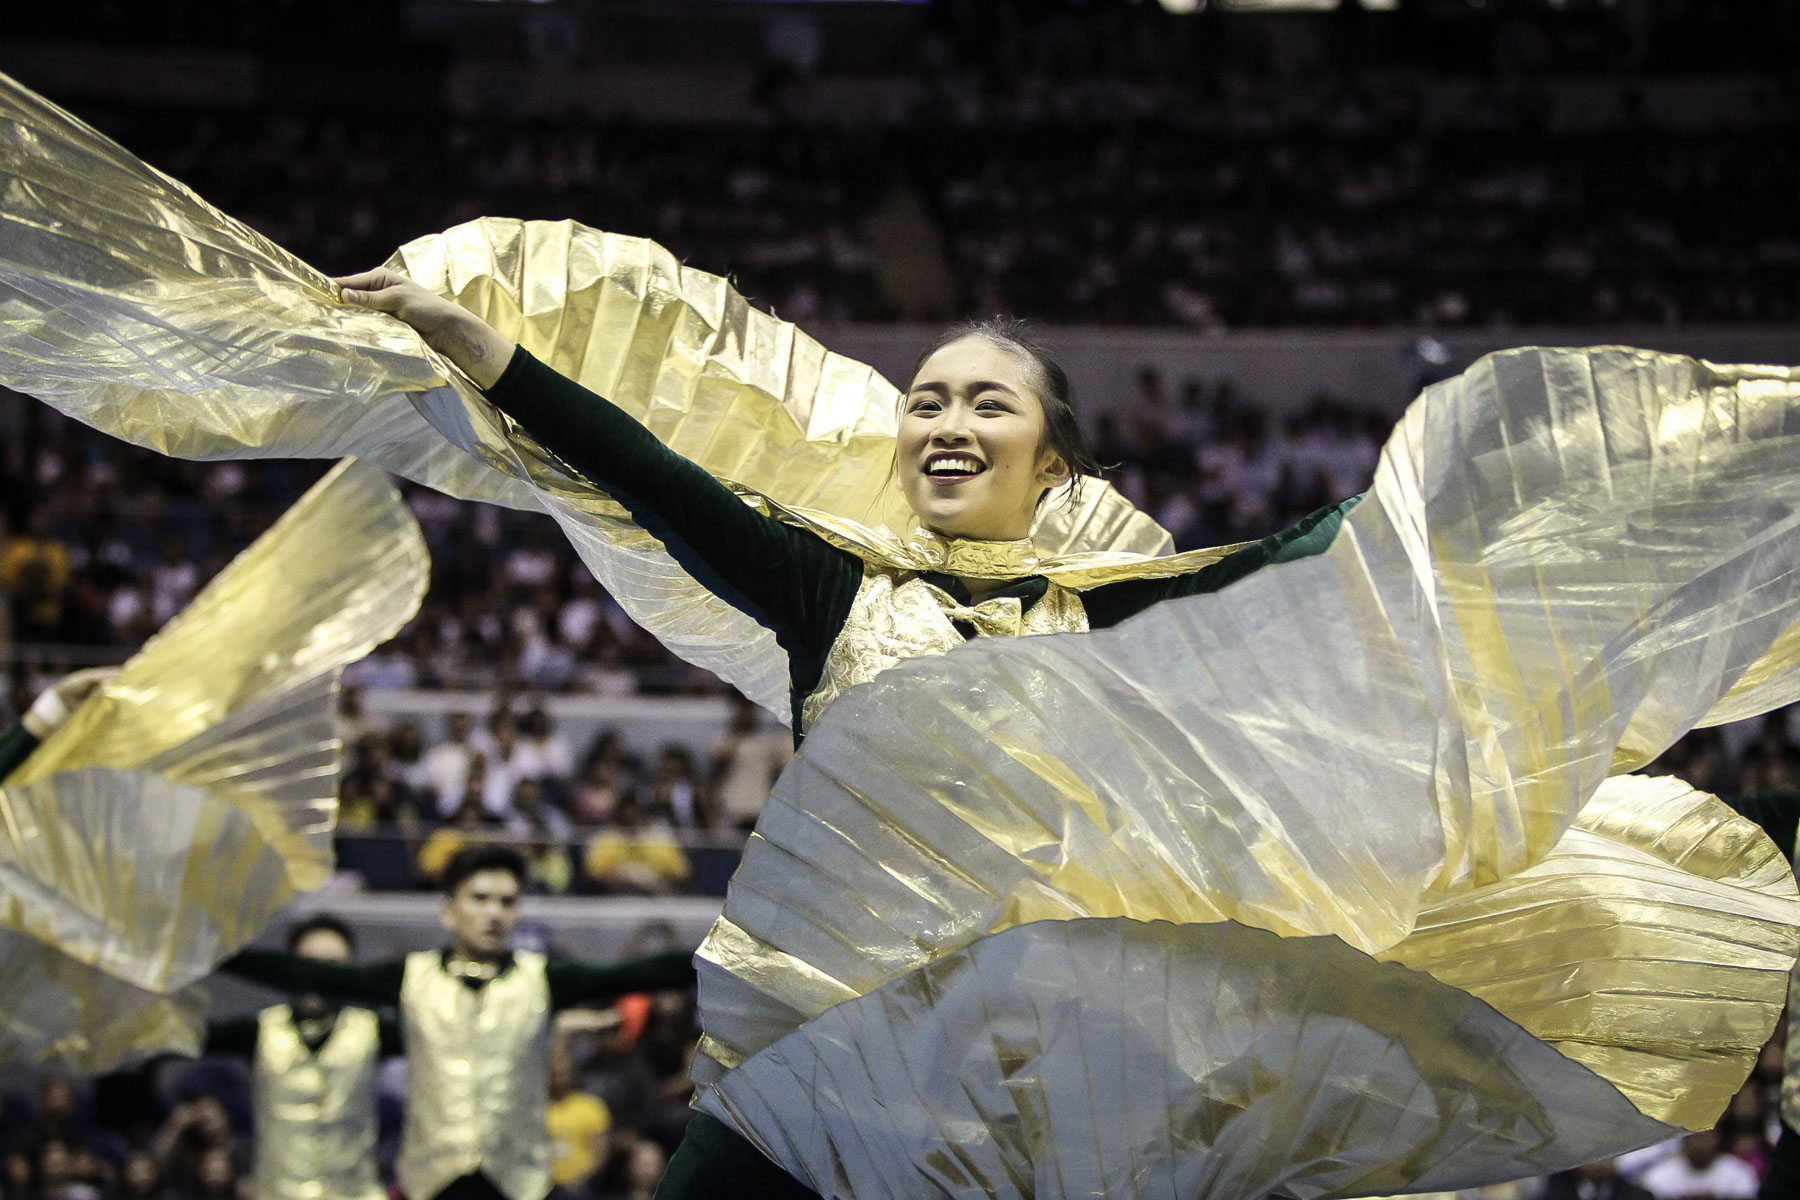 SHOWING OUT. FEU receives props for their costumes. Photo by Josh Albelda/Rappler 